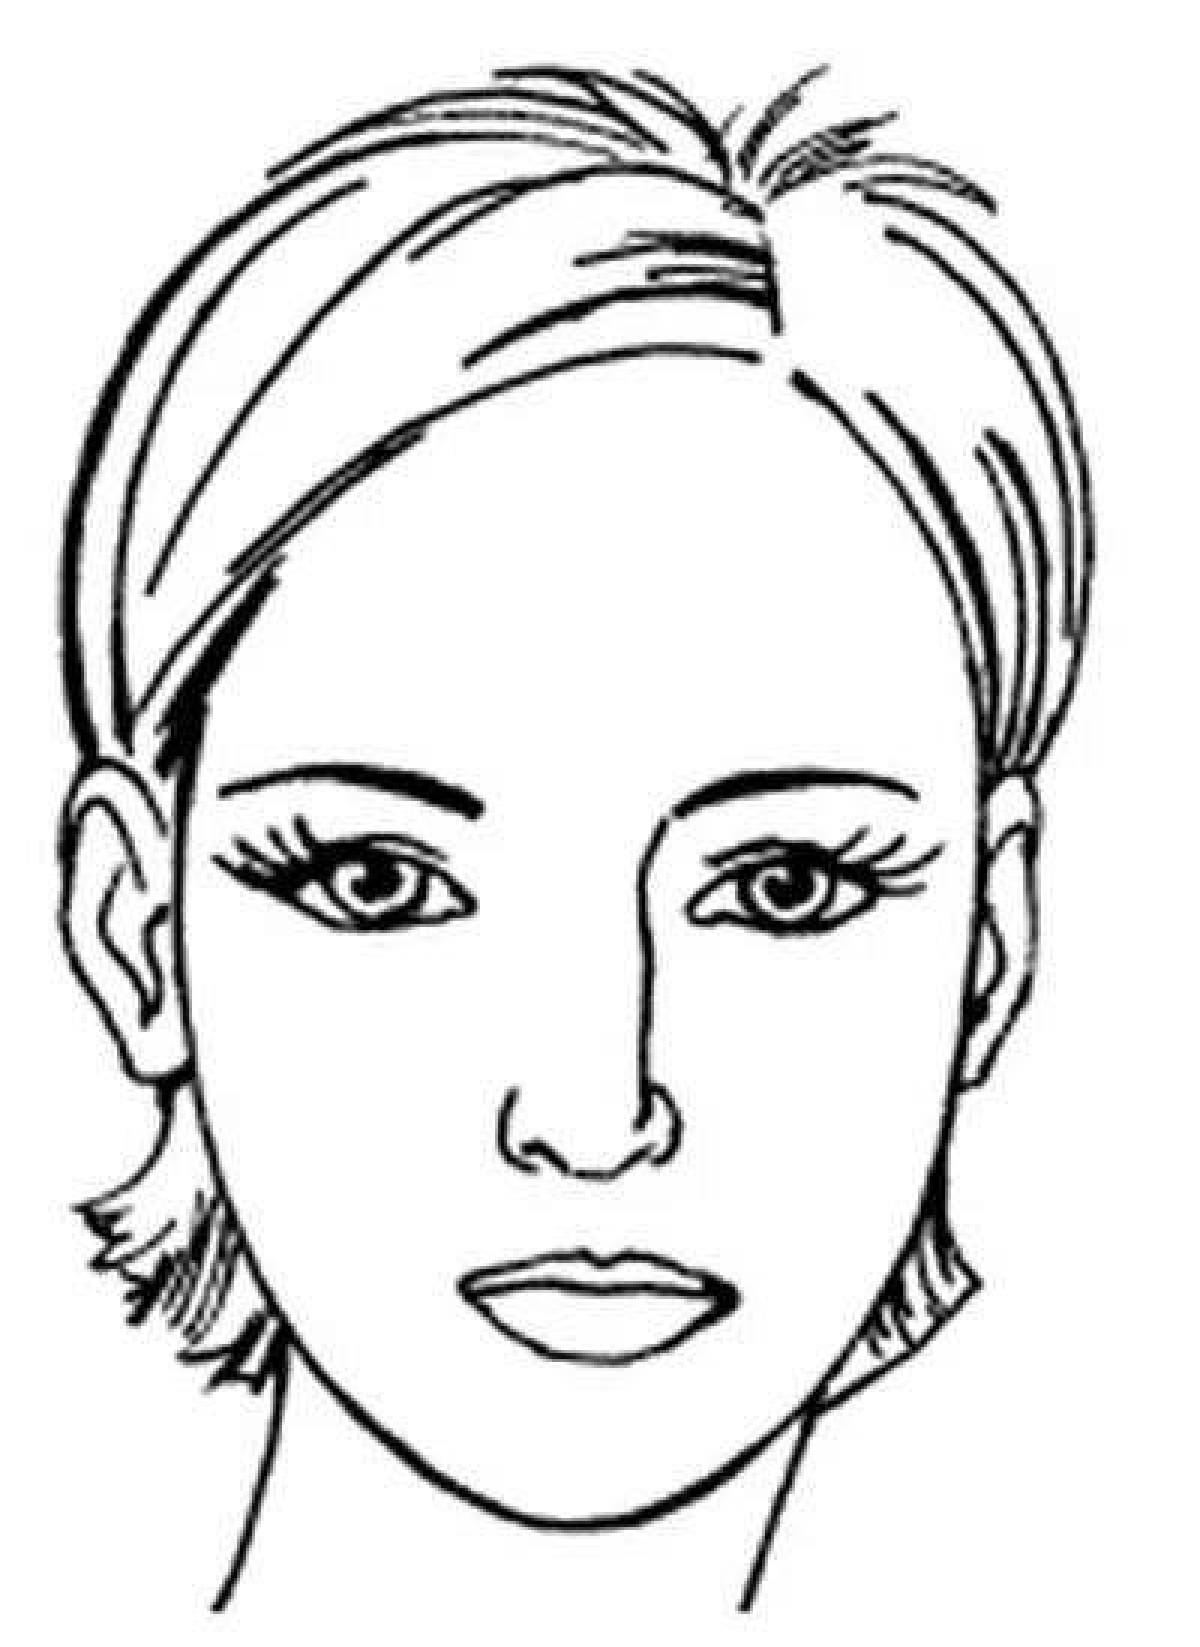 Coloring page of a majestic female face